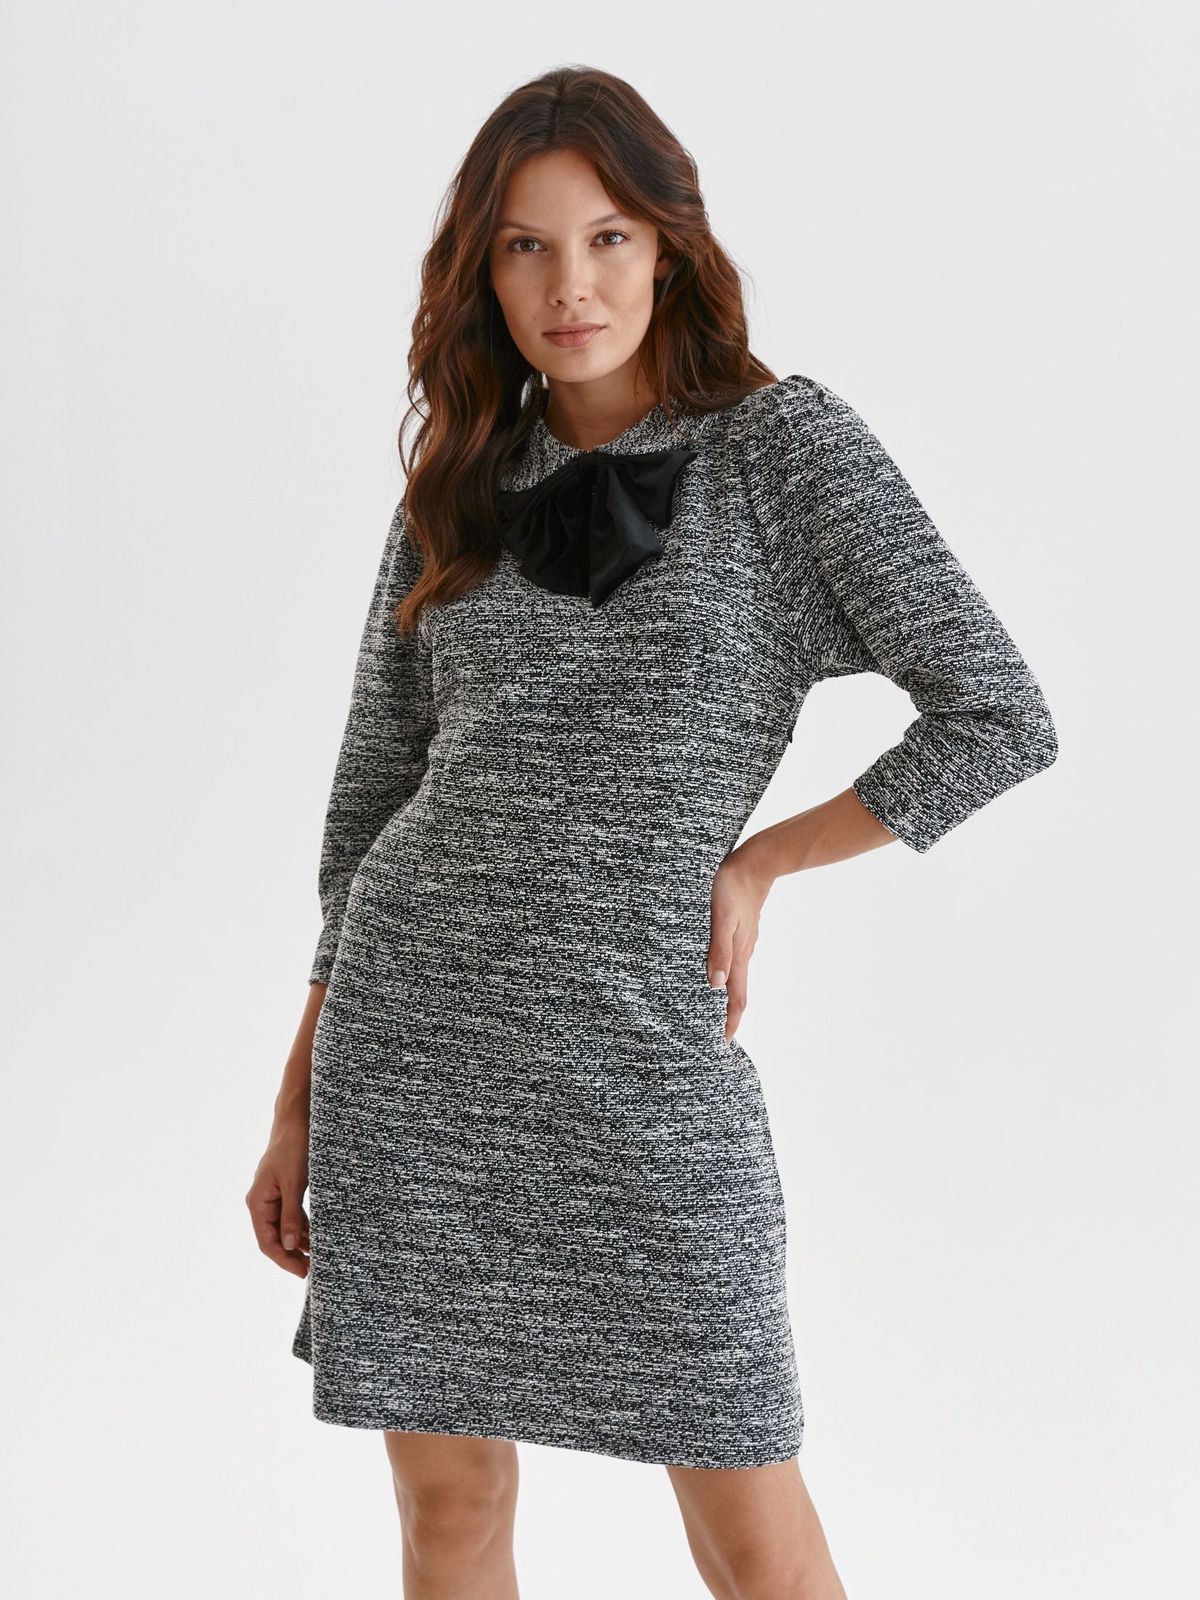 Grey dress knitted short cut a-line accessorized with breastpin